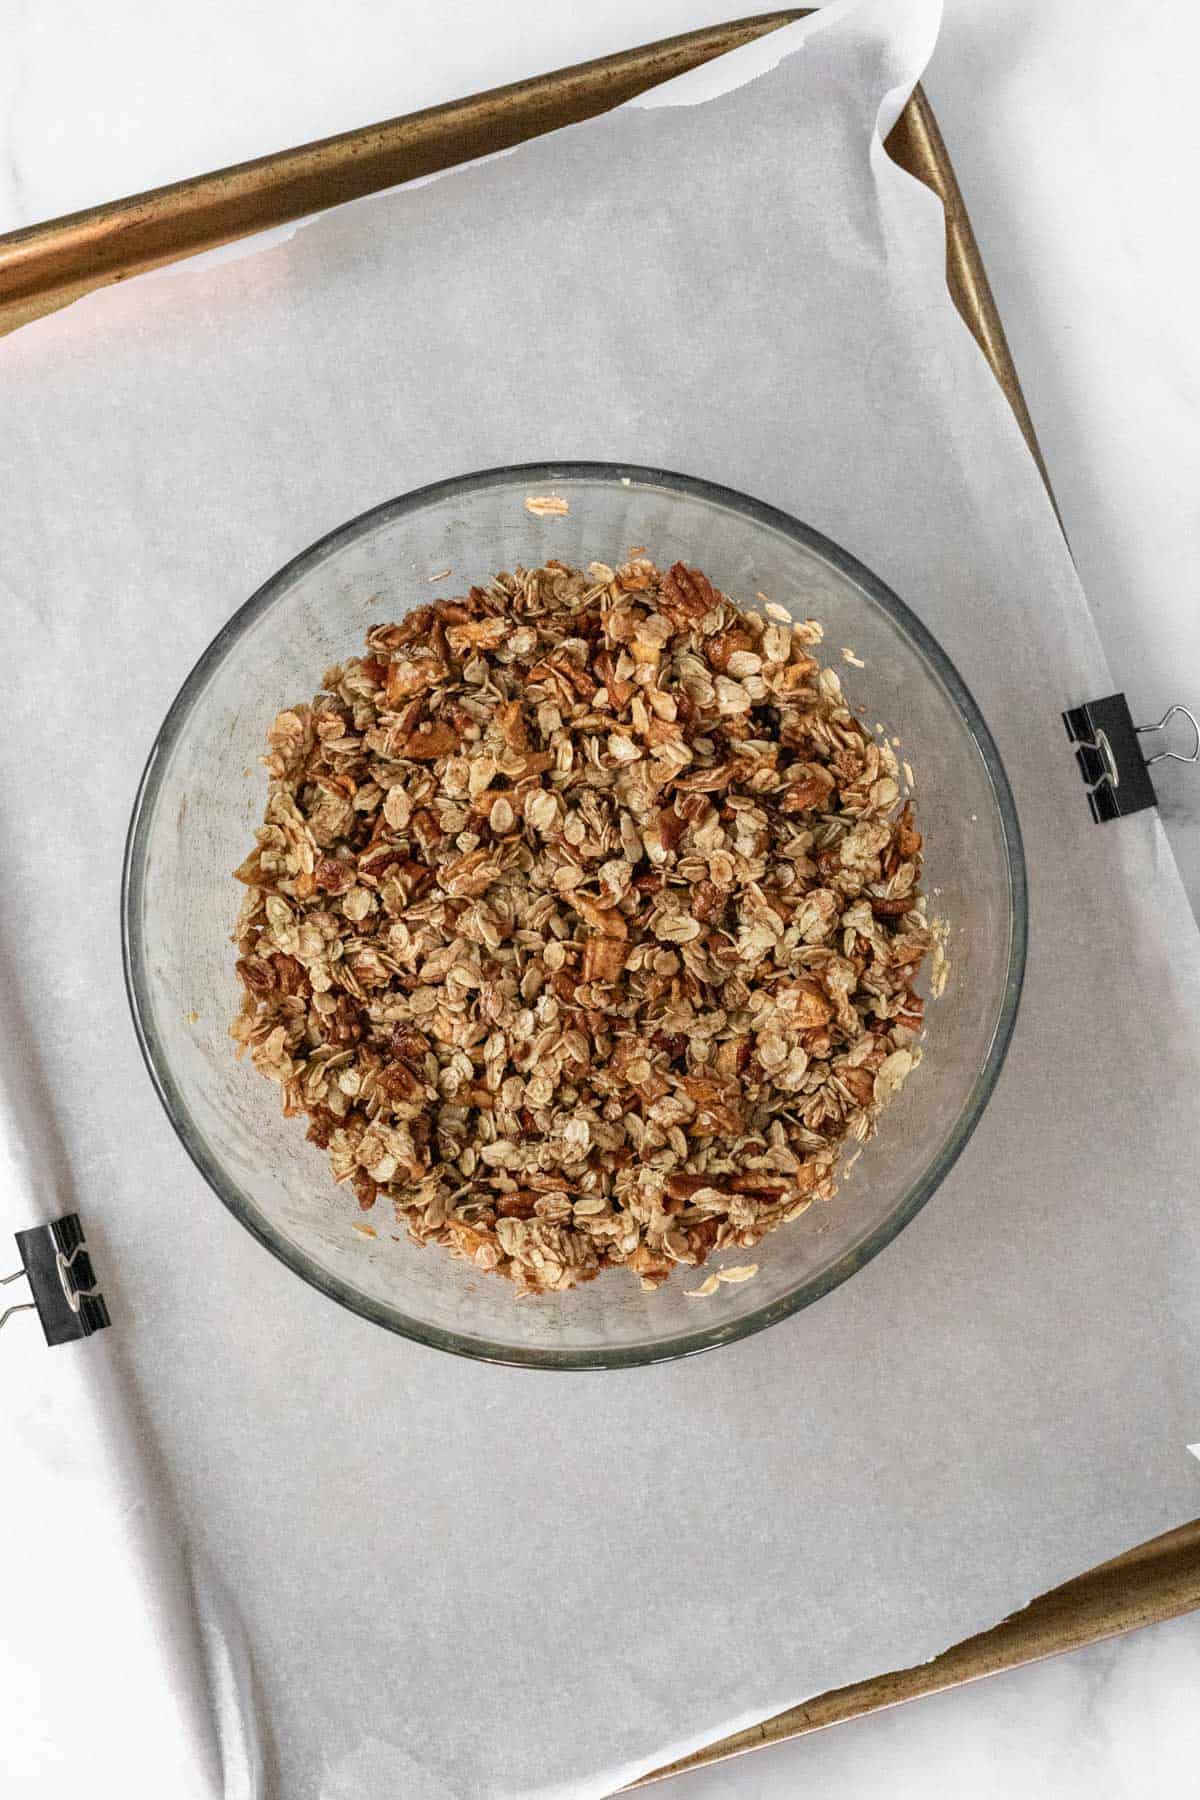 Granola ingredients mixed together in a glass bowl.